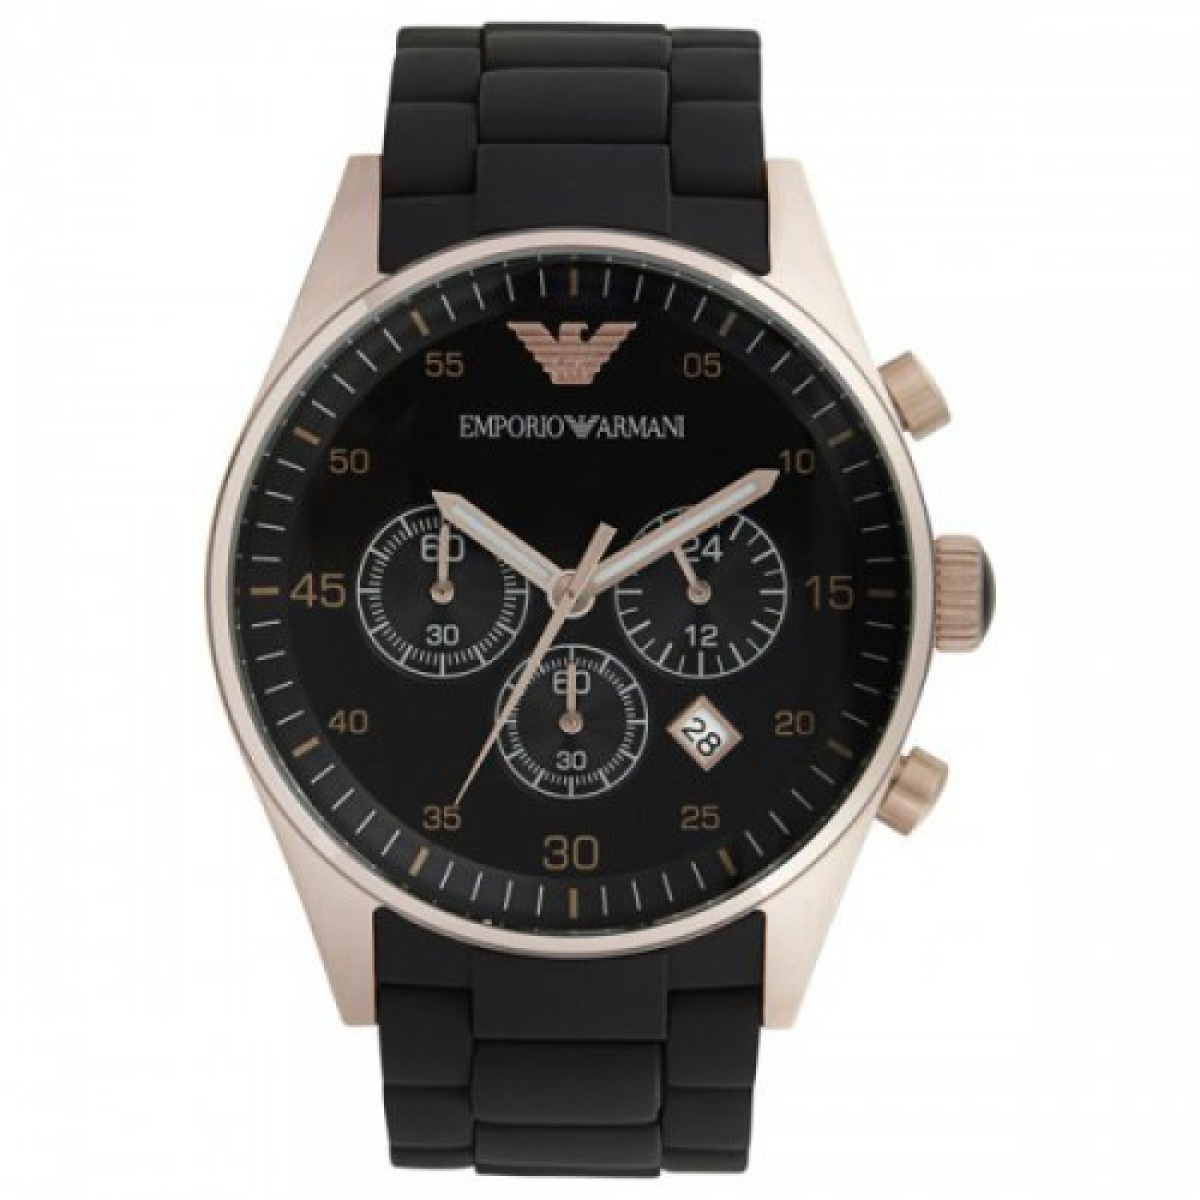 Buy Original Branded Watches in cheapest Price in Pakistan - Royal Wrist